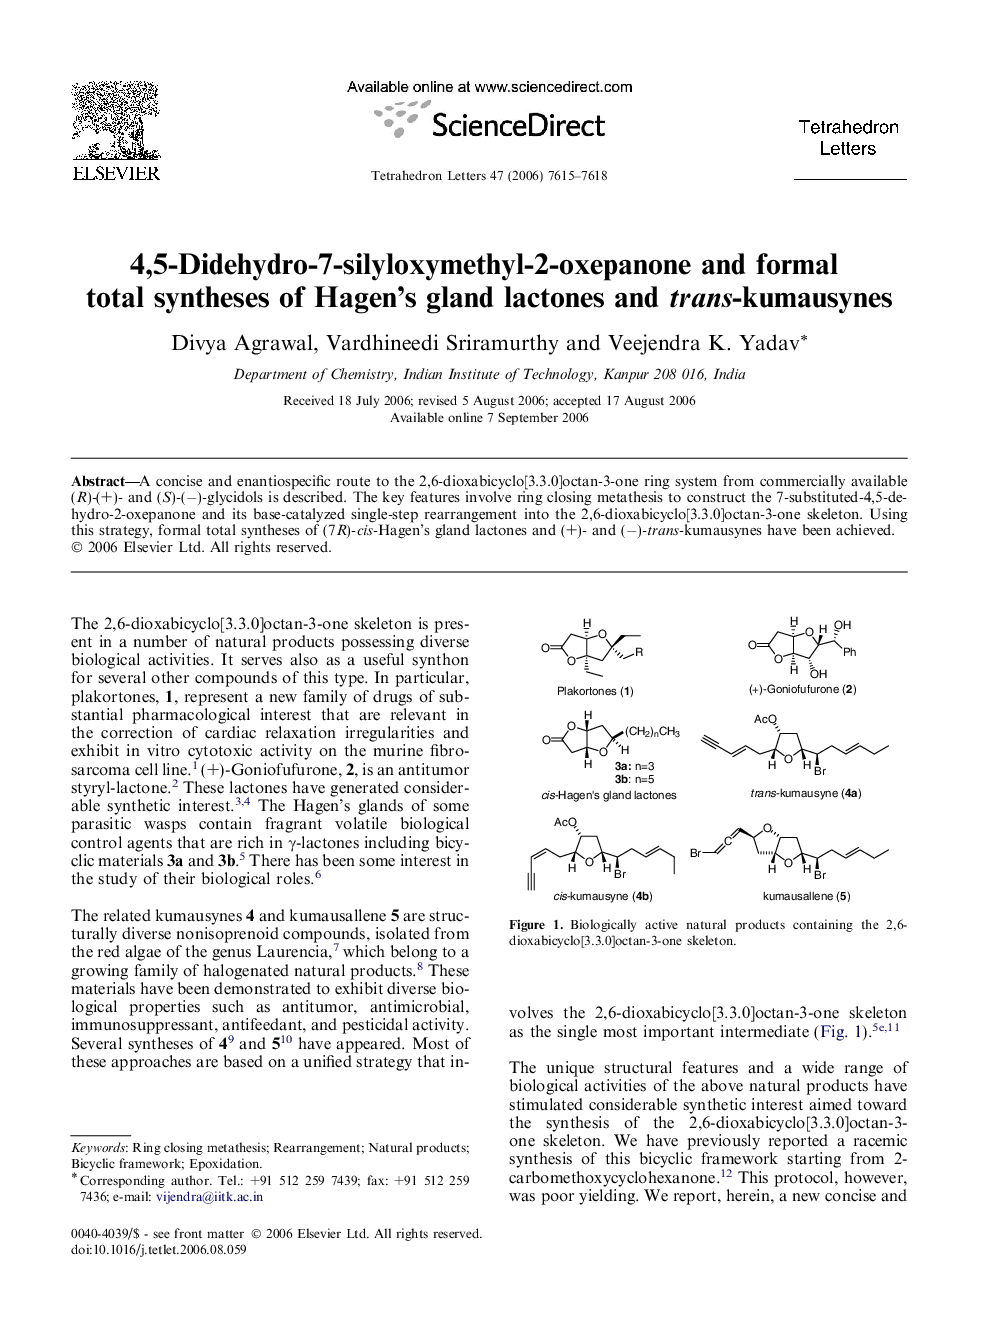 4,5-Didehydro-7-silyloxymethyl-2-oxepanone and formal total syntheses of Hagen's gland lactones and trans-kumausynes